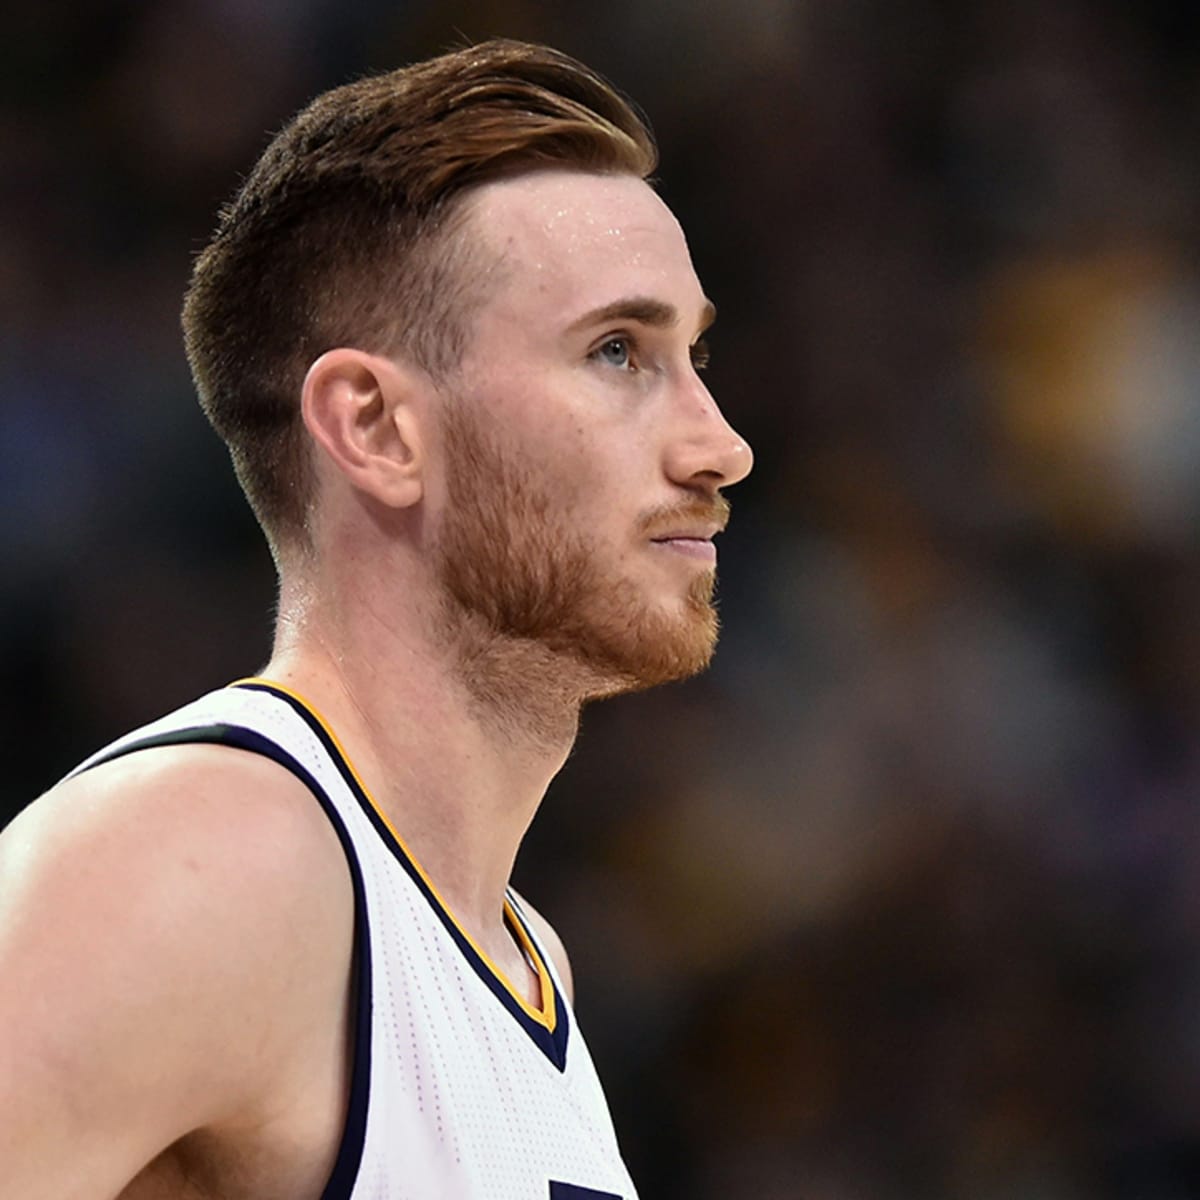 Will Gordon Hayward Opt Out Of Contract? NBA Experts' Predictions Differ 